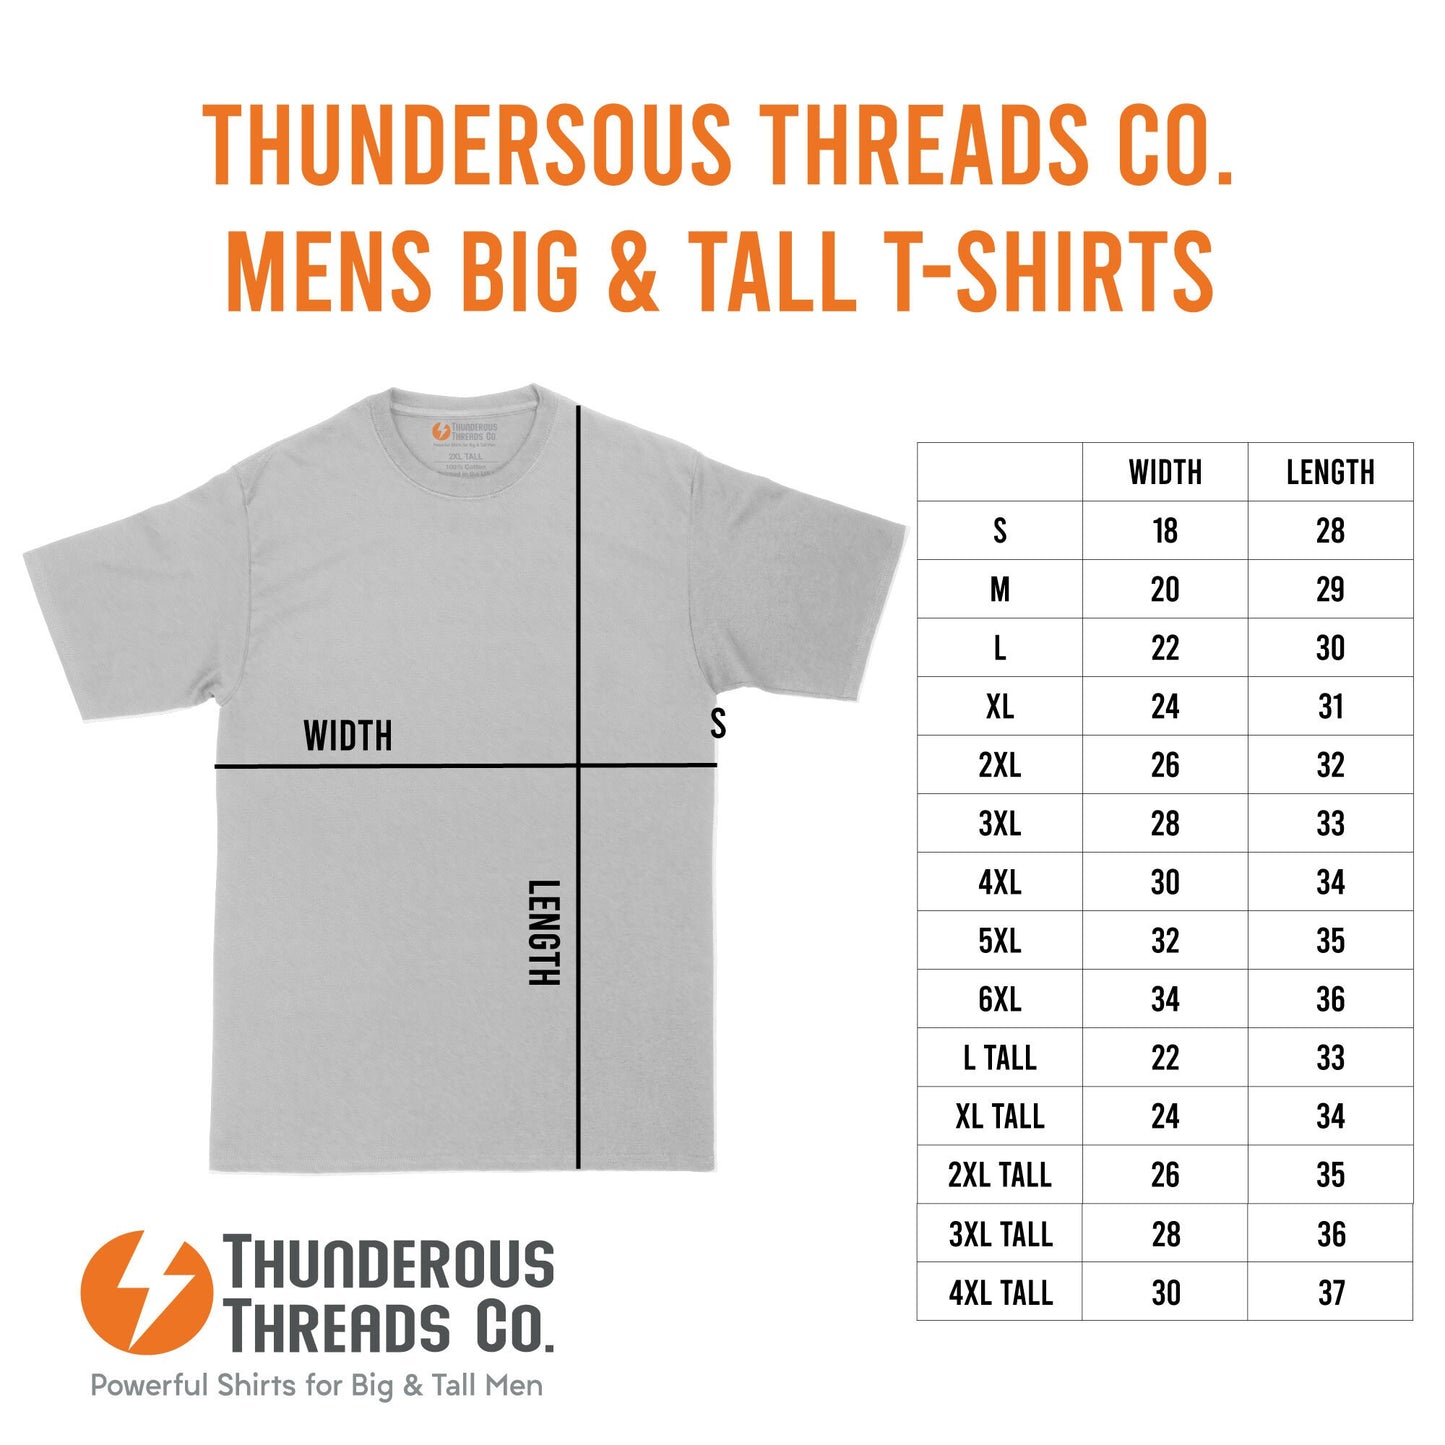 Big and Tall Men | If Monday Had a Face I Would Punch It | Mens Big and Tall Graphic T-Shirt | Shirts for Big Guys